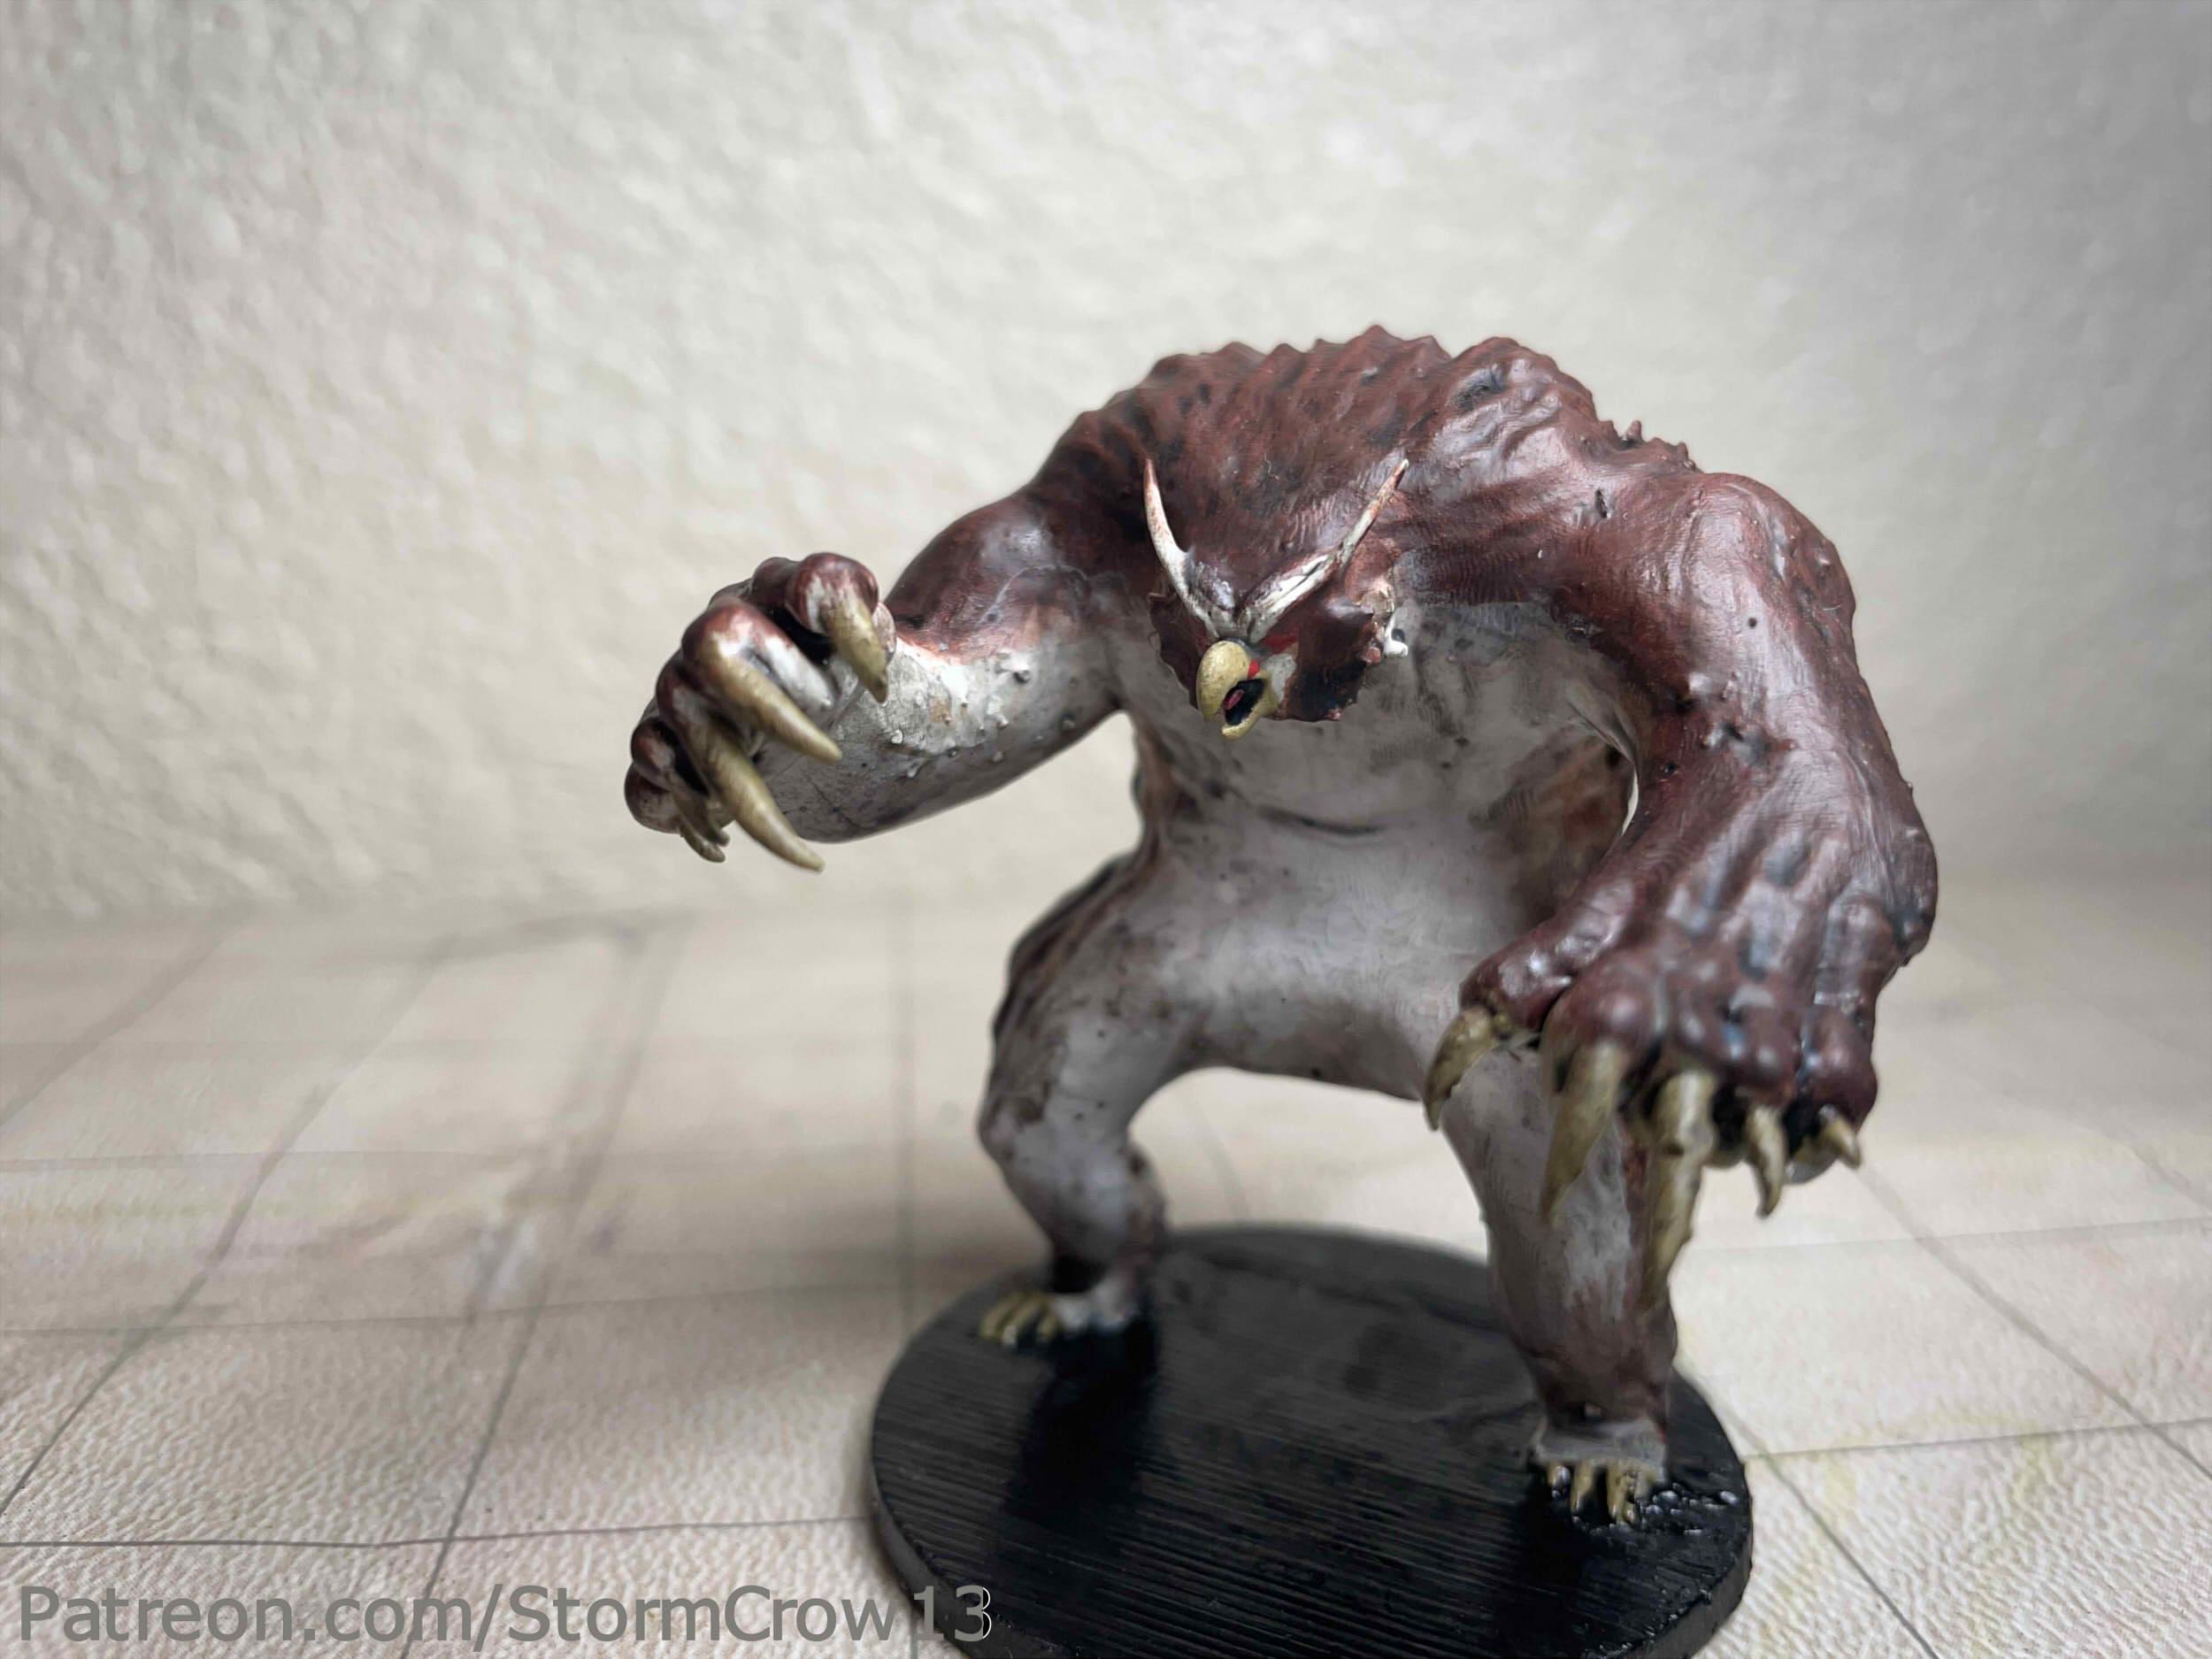 Owlbear through the ages- Pathfinder:Dungeon Denizens Revisited 3d model